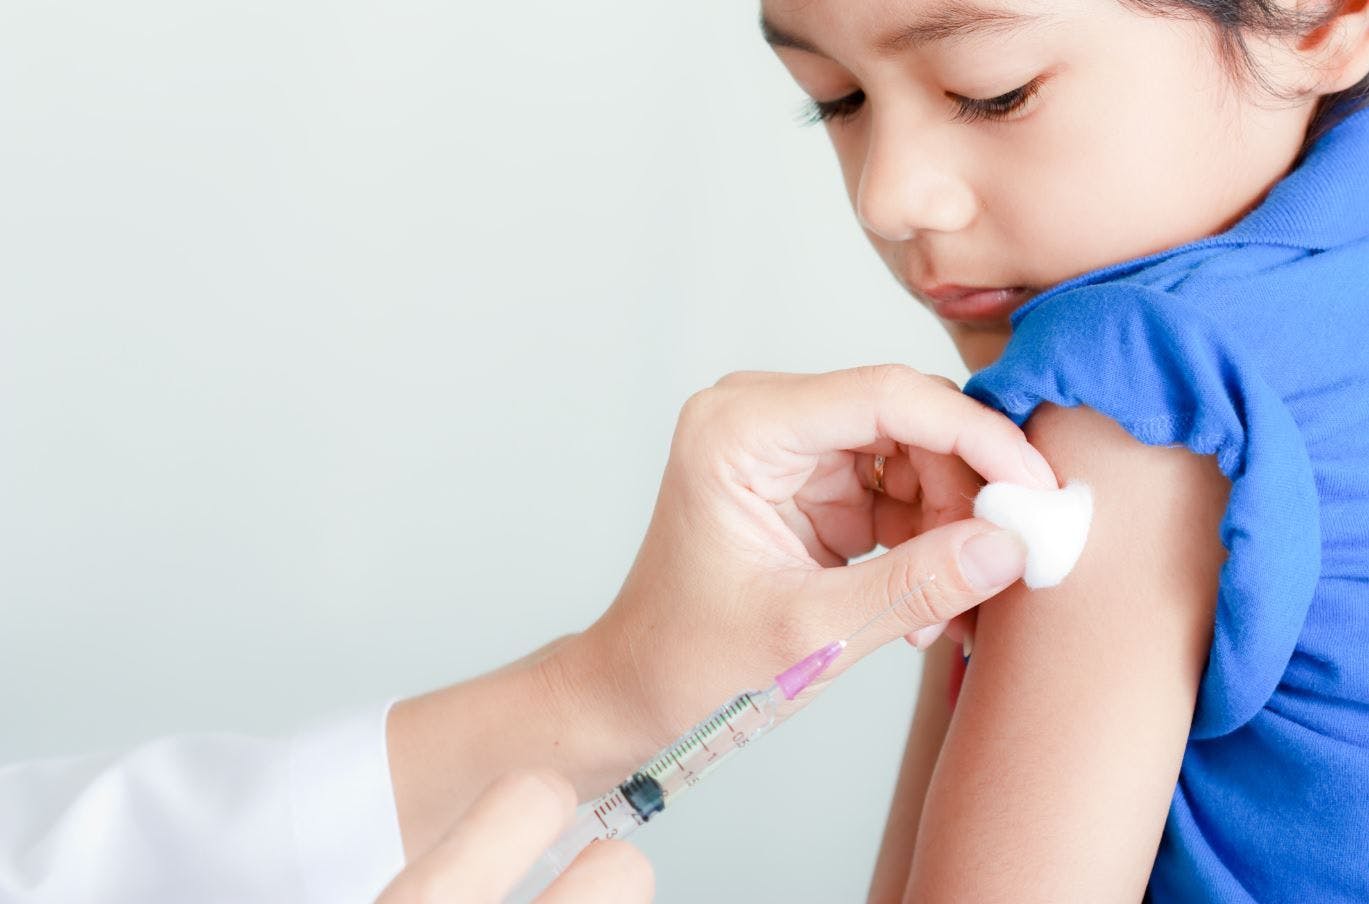 COVID-19 Vaccines Safe and Effective in Children Aged 5-11 Years, According to New Research